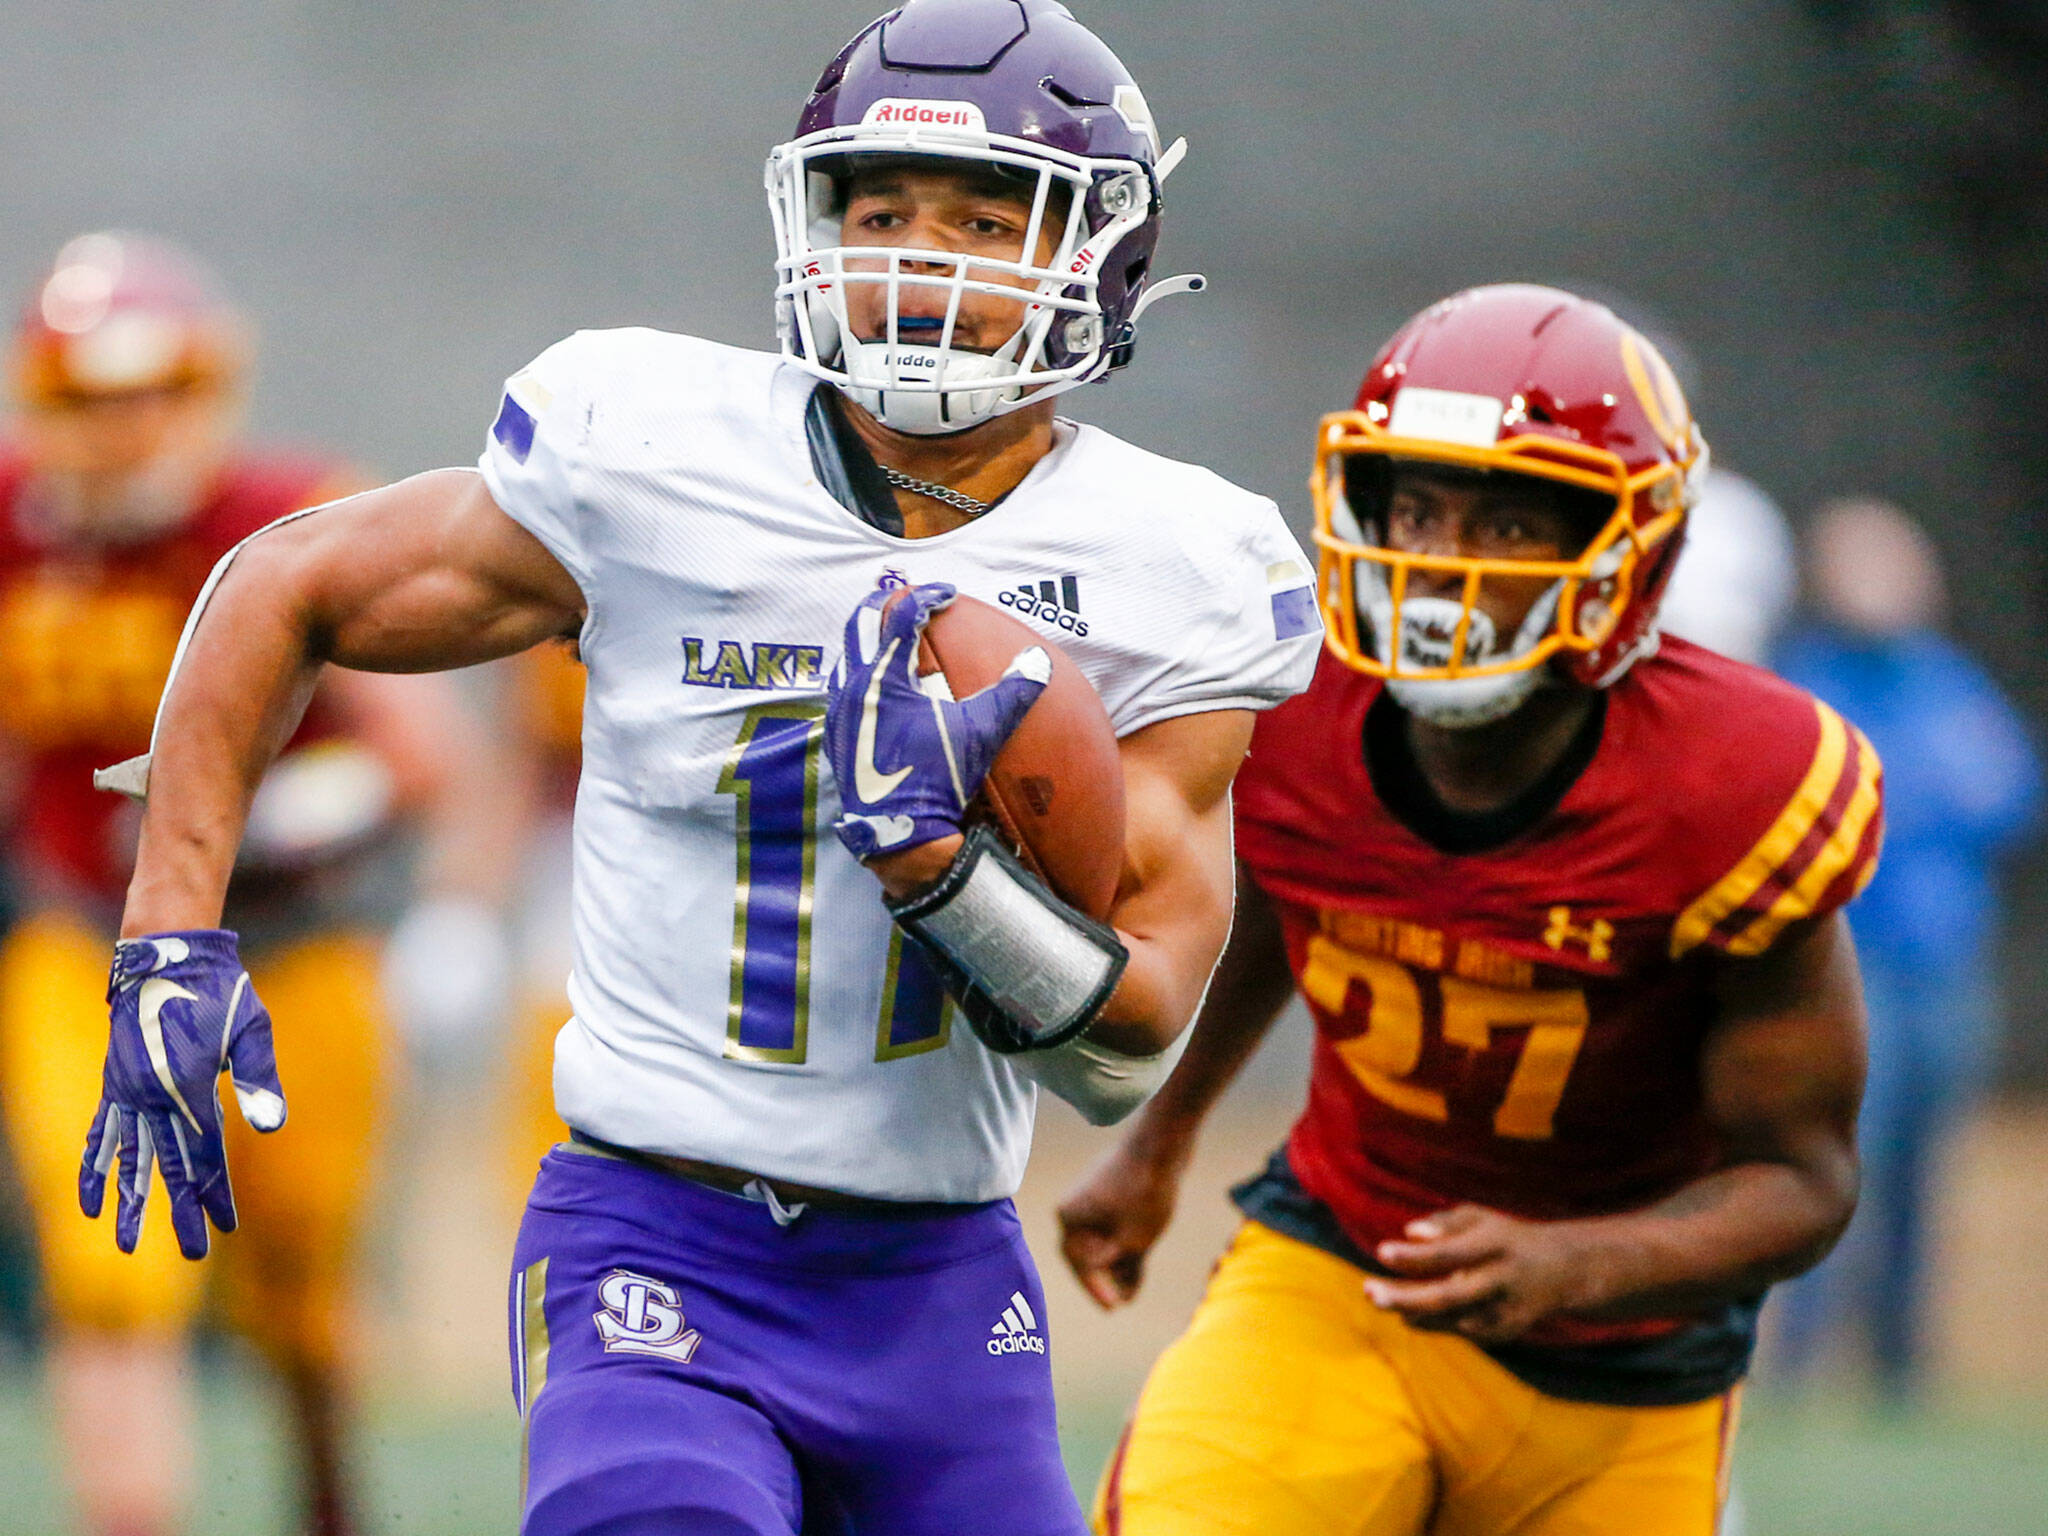 Lake Stevens senior and Notre Dame commit Jayden Limar is one of the top high school running backs in the nation. (Kevin Clark / The Herald)